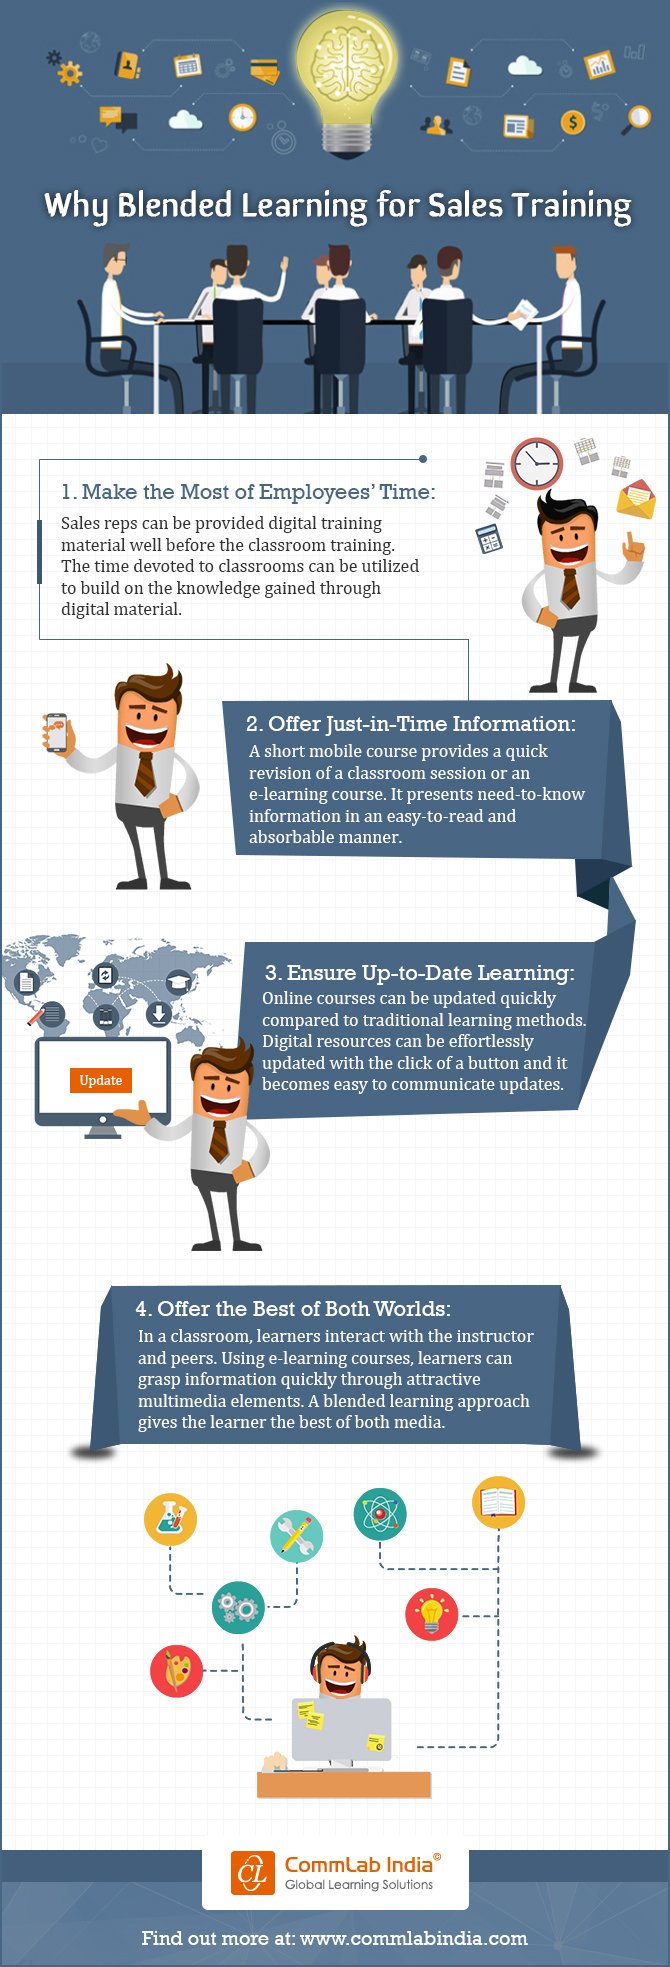 Why Blended Learning for Sales Training [Infographic]